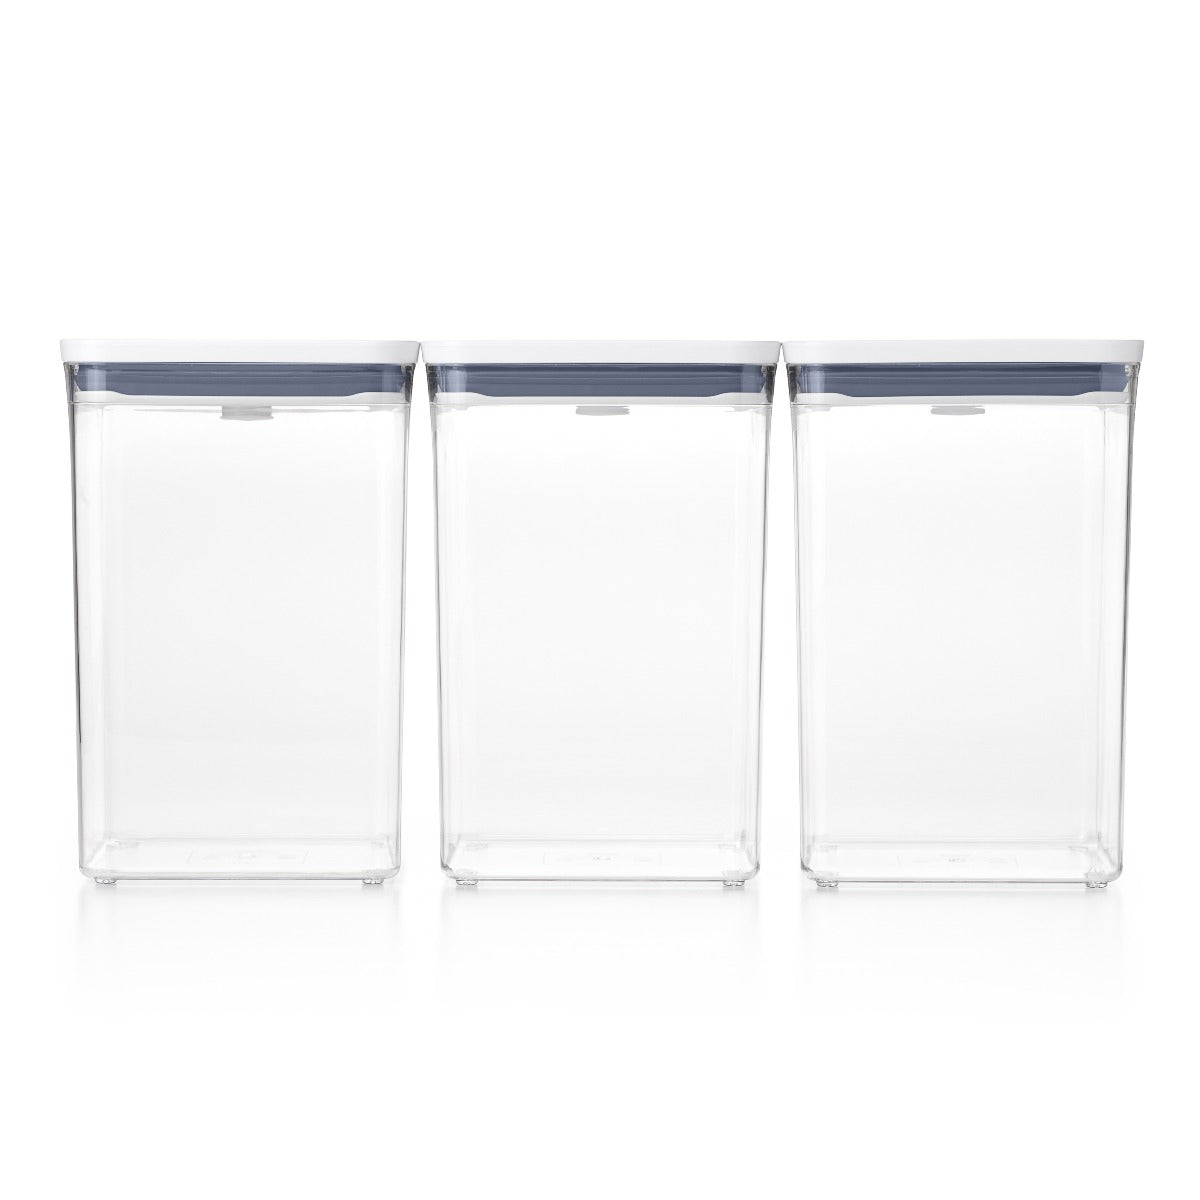 OXO Good Grips POP Food Storage Container, Clear Plastic Square, 1.7 Qt.